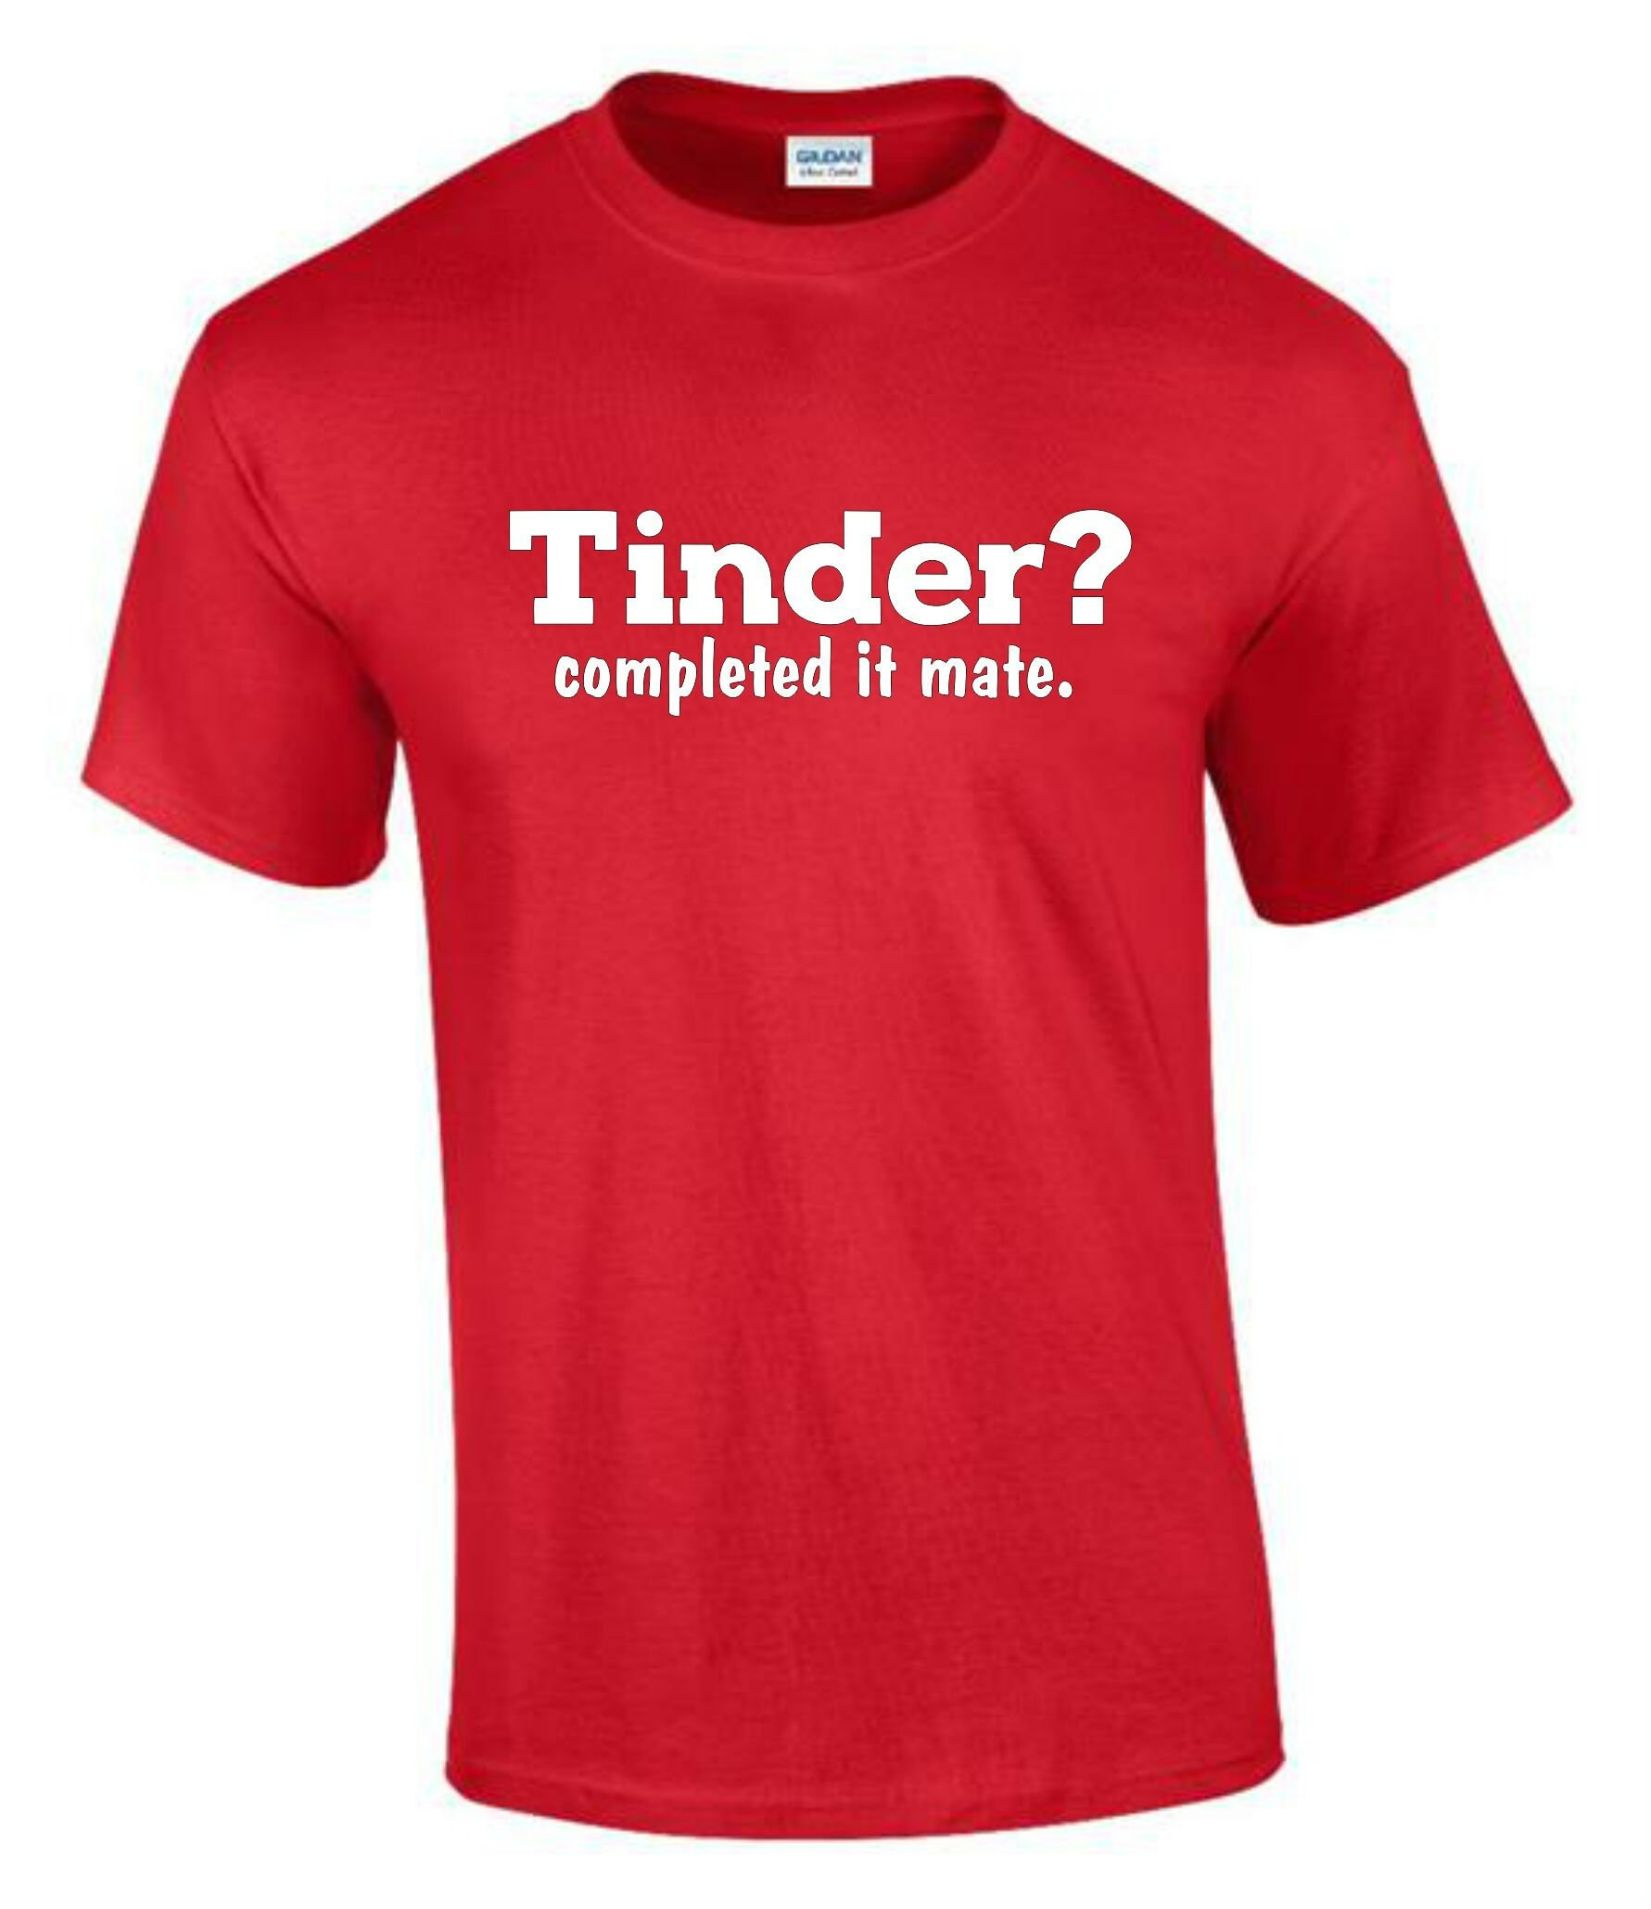 Tinder Completed it Mate Funny Rude Men’s Ladys T-Shirt